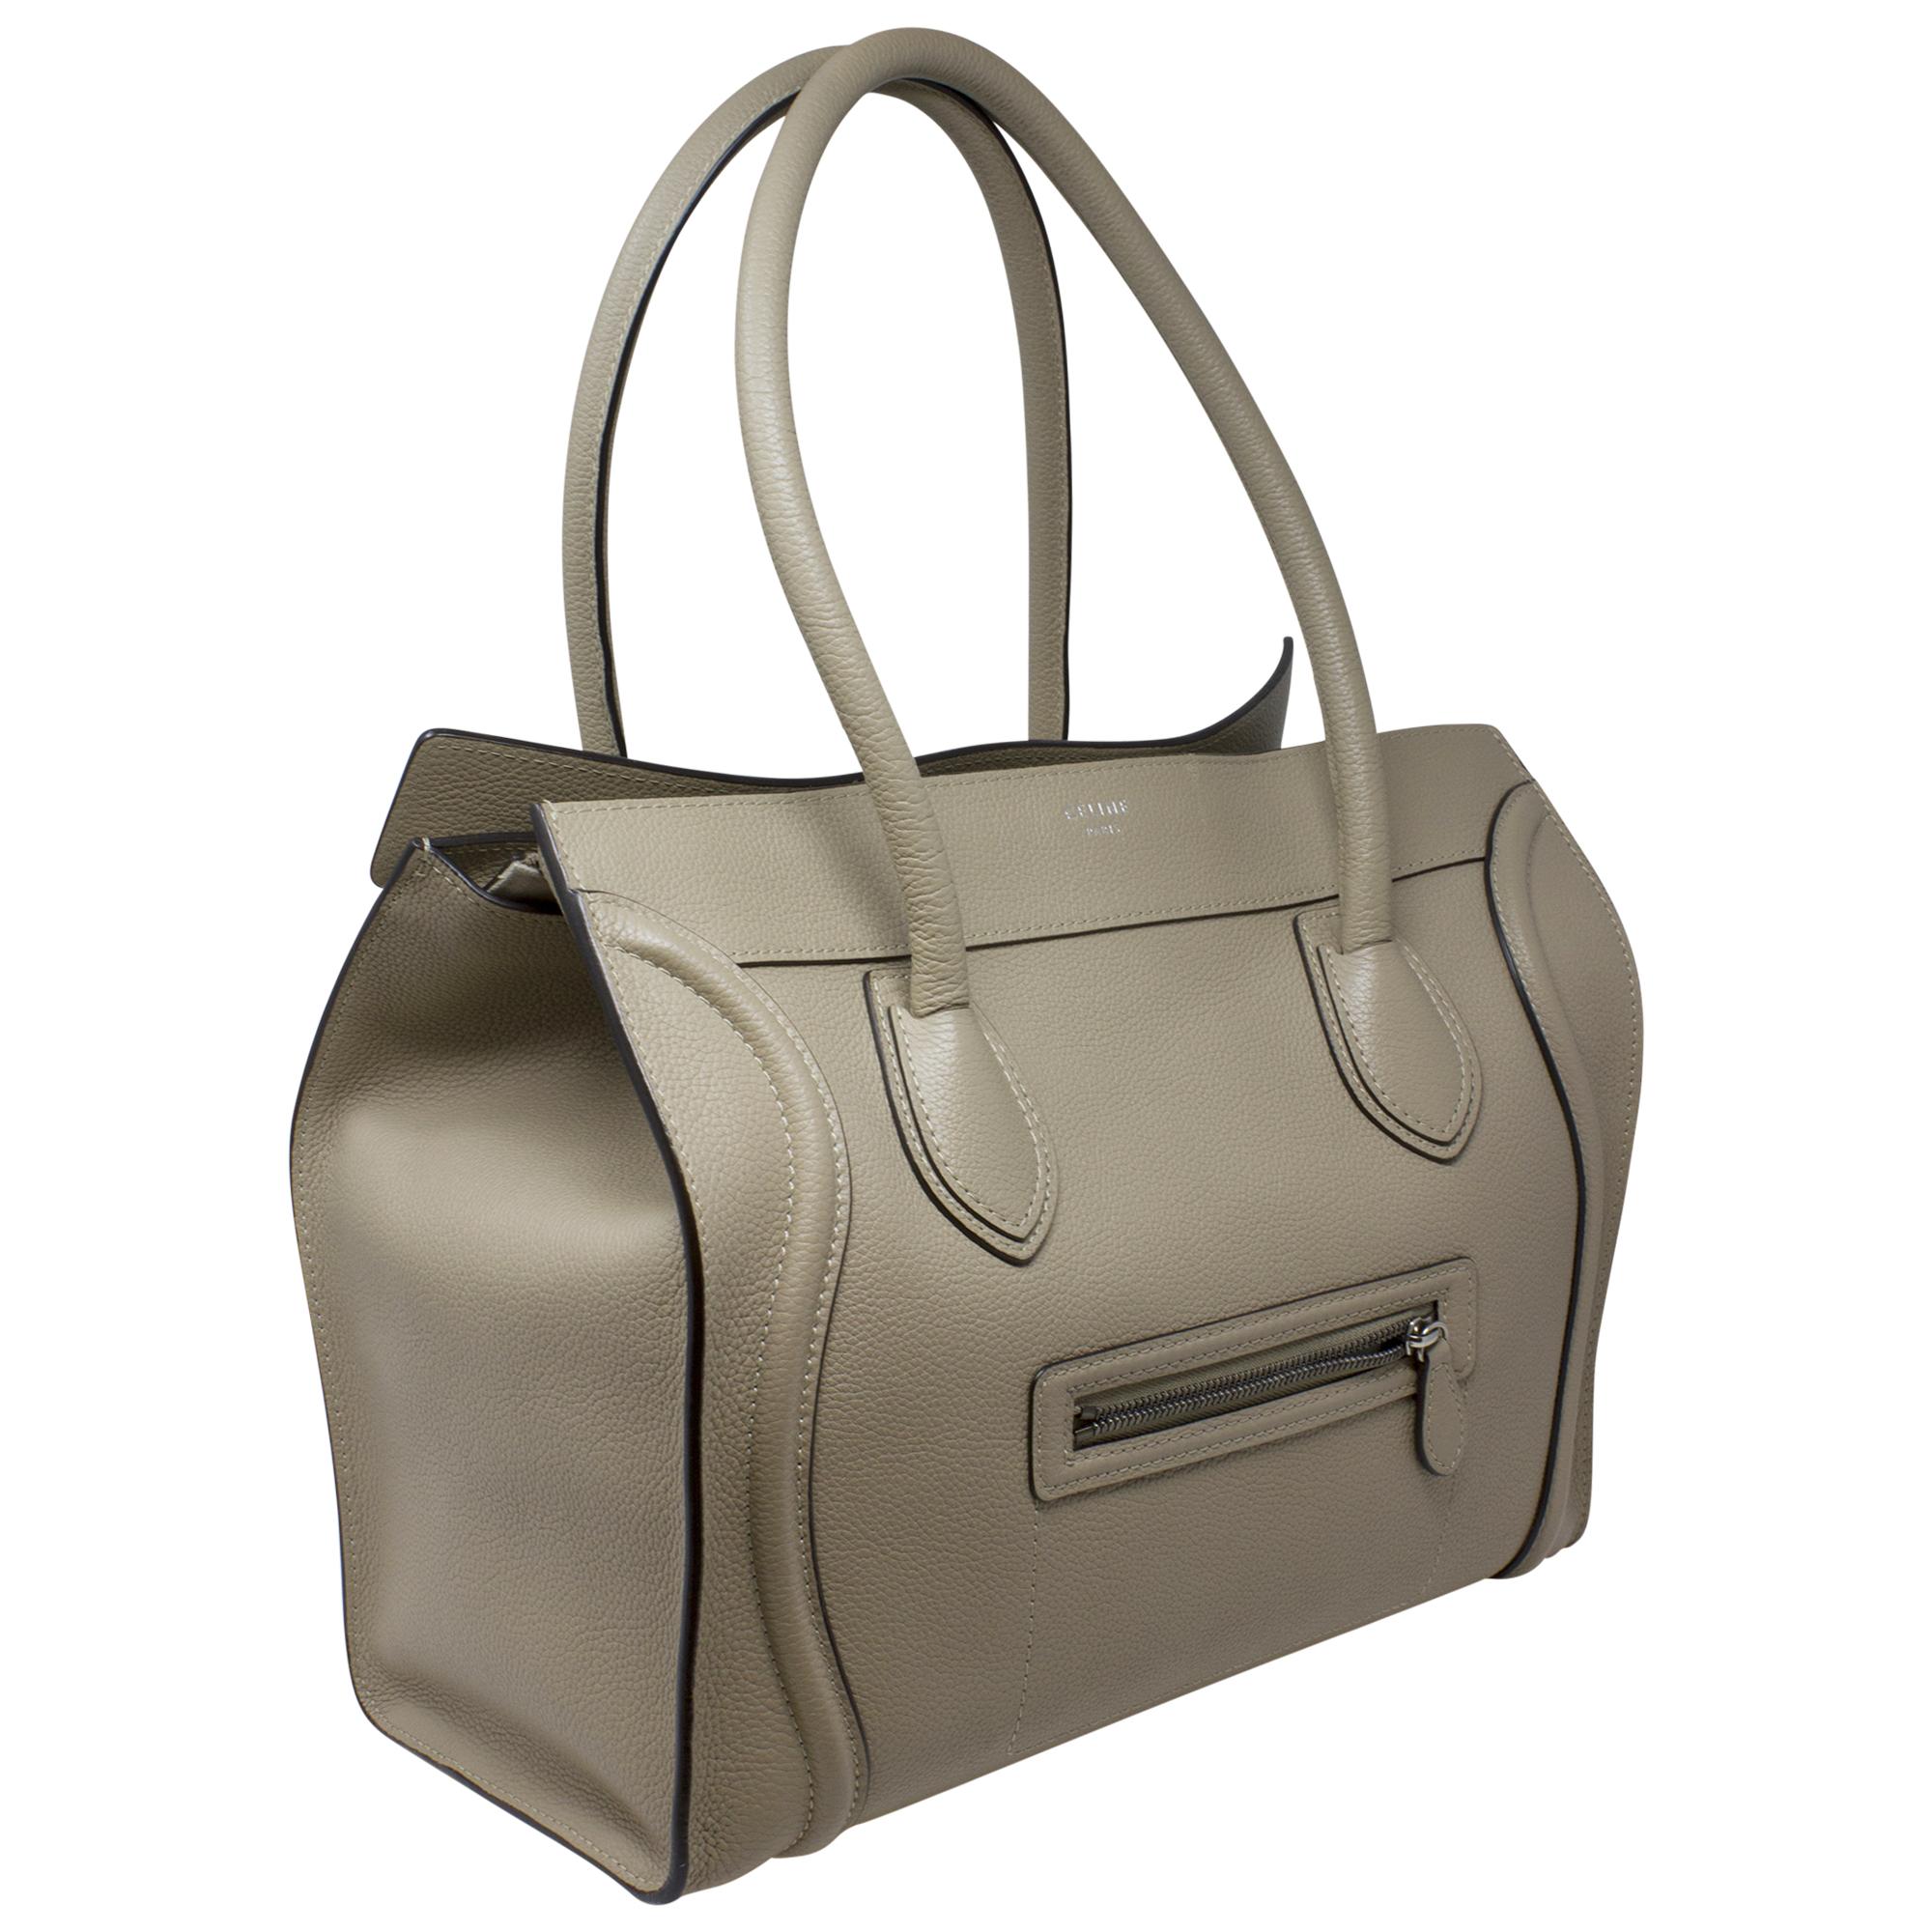 Introducing the Celine Dune Grained Leather Tote, a timeless essential for the modern woman. Crafted from luxurious dune grained leather, this tote exudes understated elegance and sophistication. With its minimalist design and silver hardware